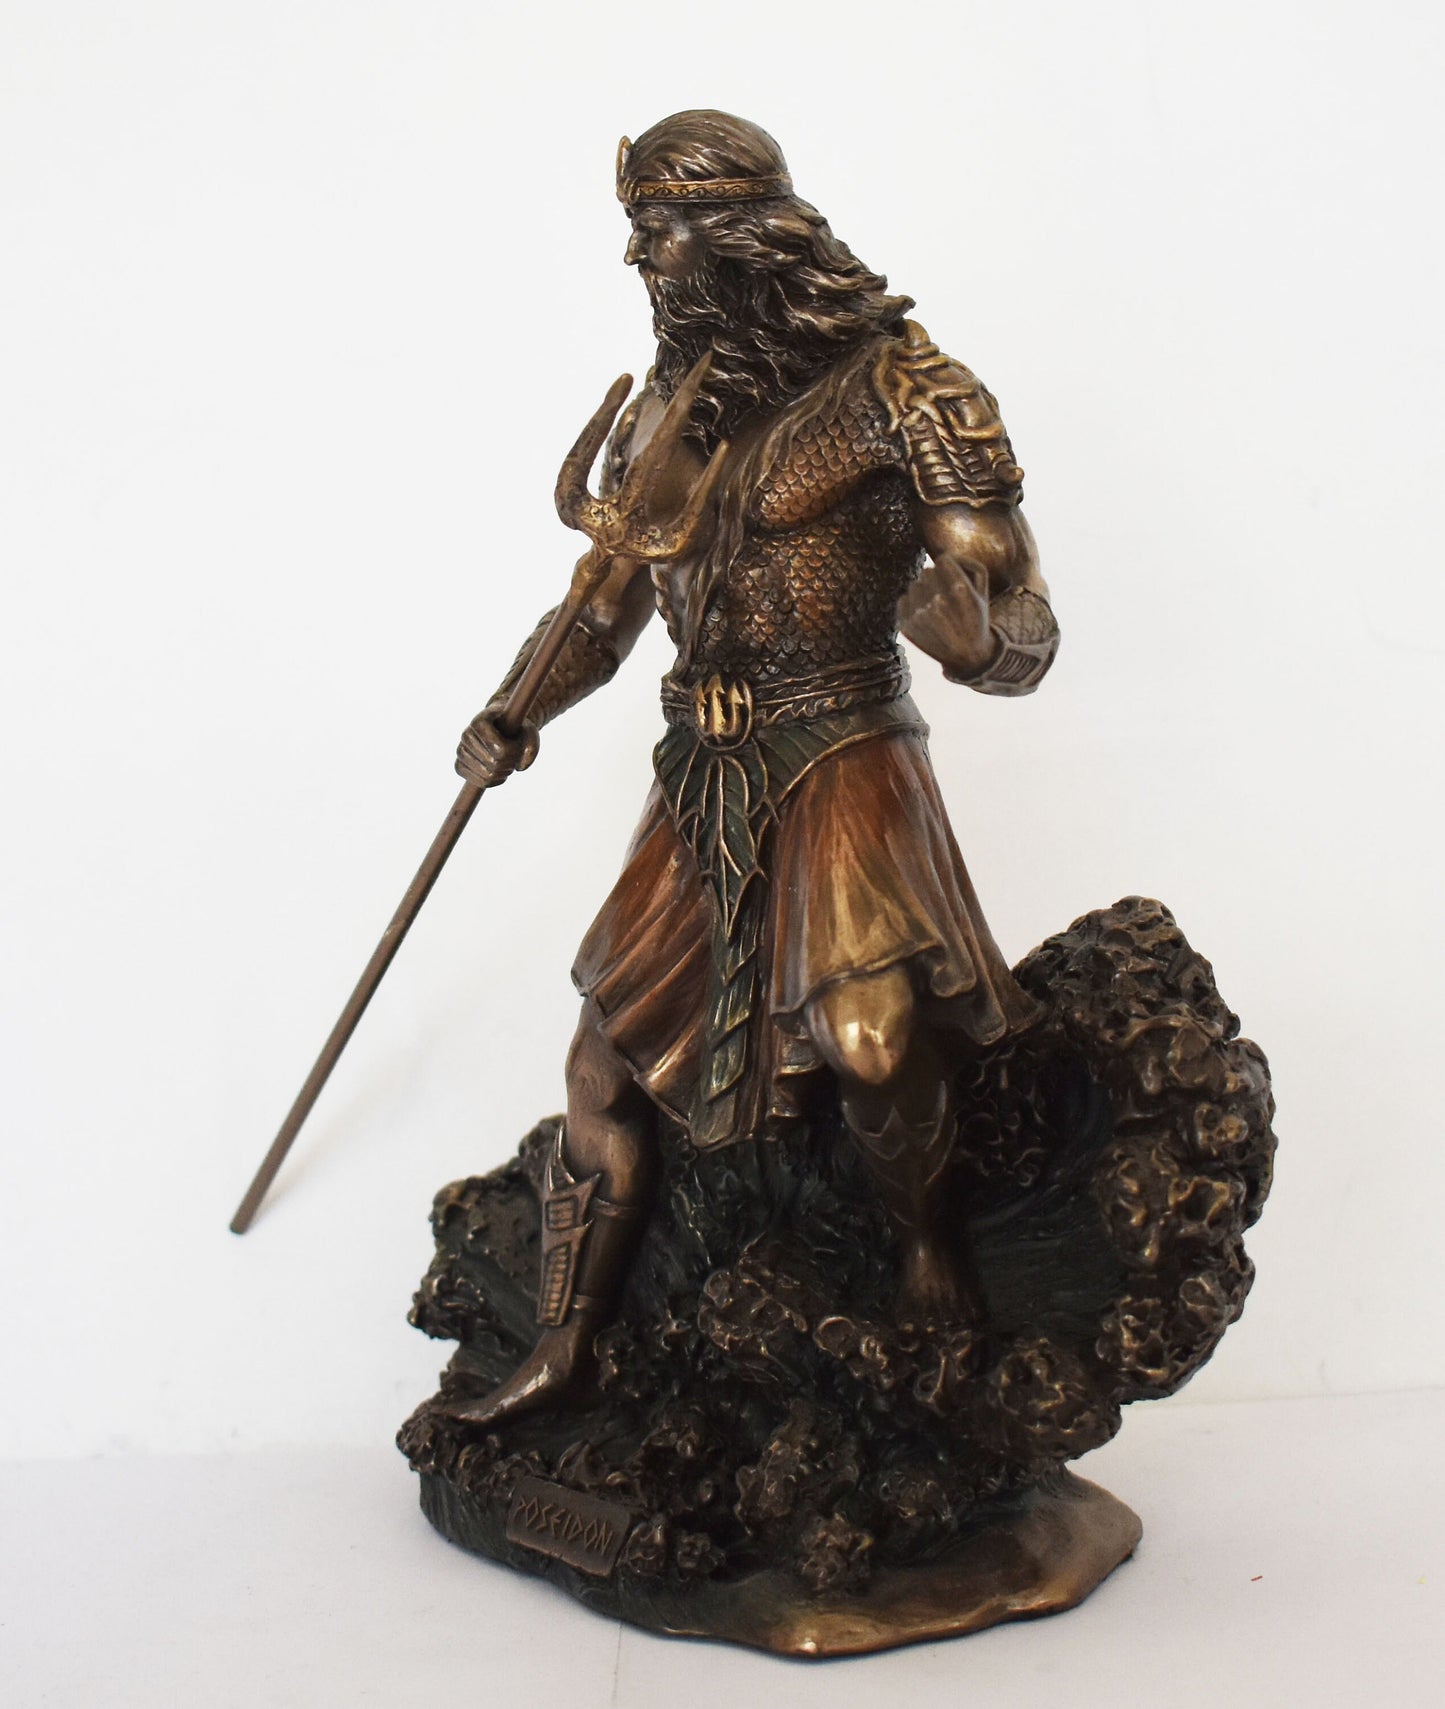 Poseidon Neptune - Greek Roman God of the Sea, Storms, Earthquakes and Horses -  Protector of Seafarers - Cold Cast Bronze Resin